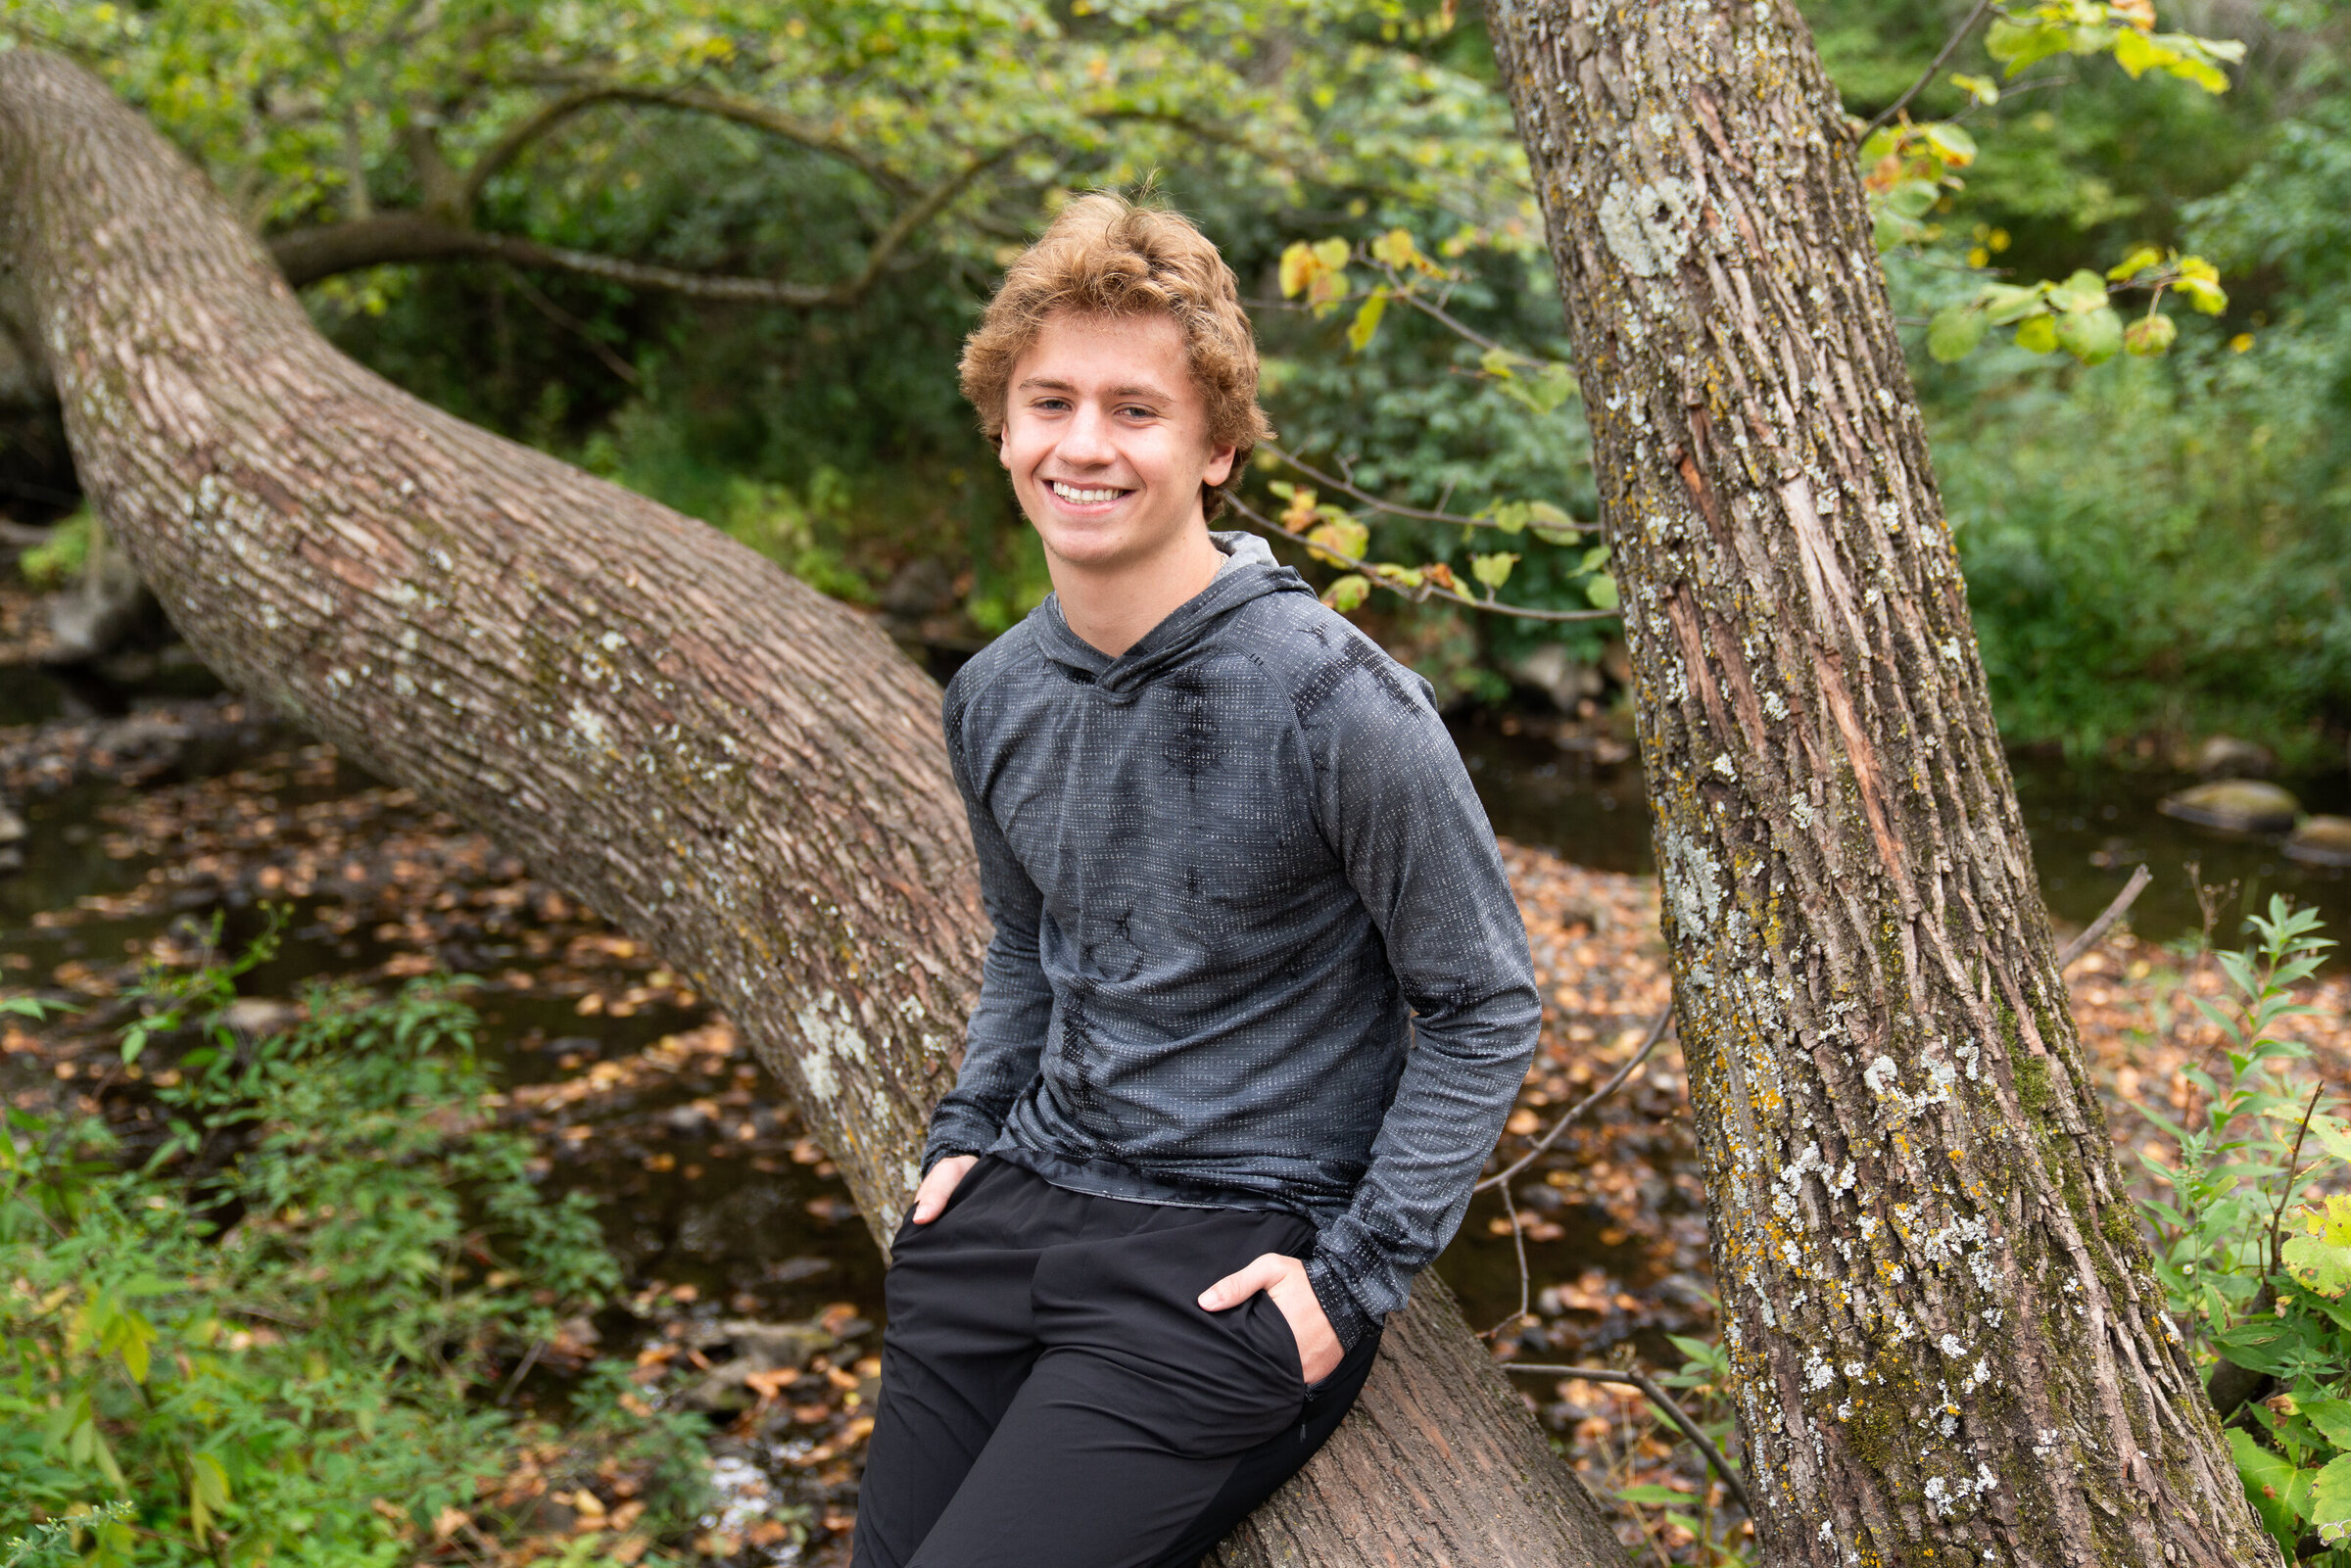 Guy leans against a tree during his senior photo shoot